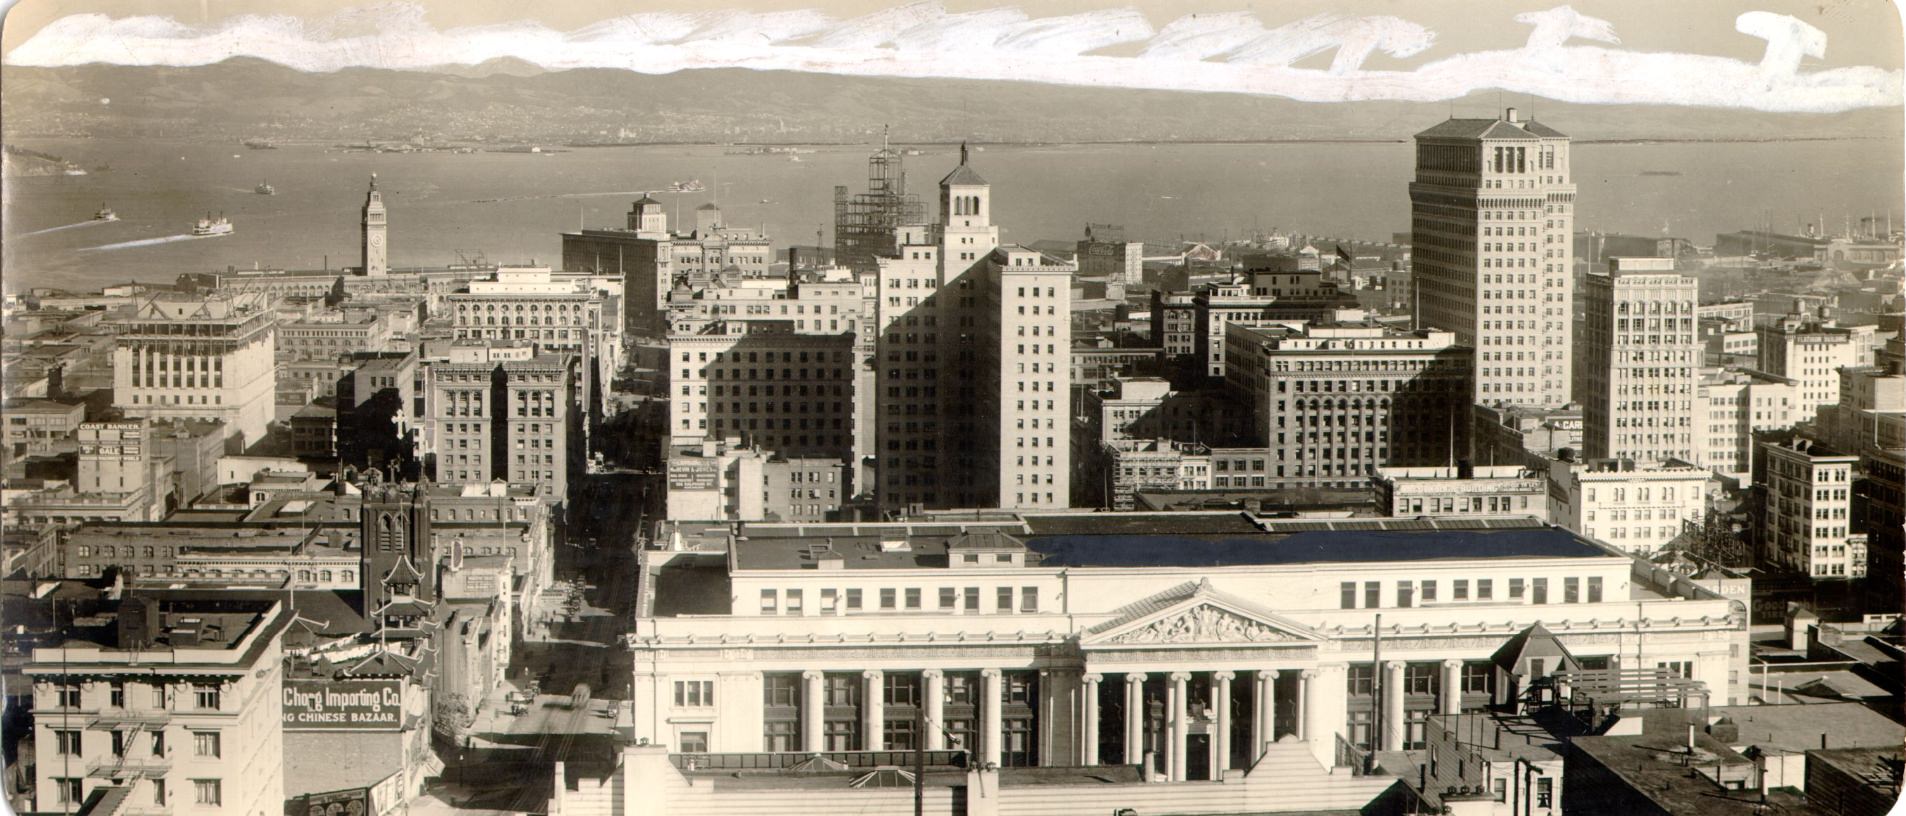 View of downtown San Francisco looking southeast, 1923